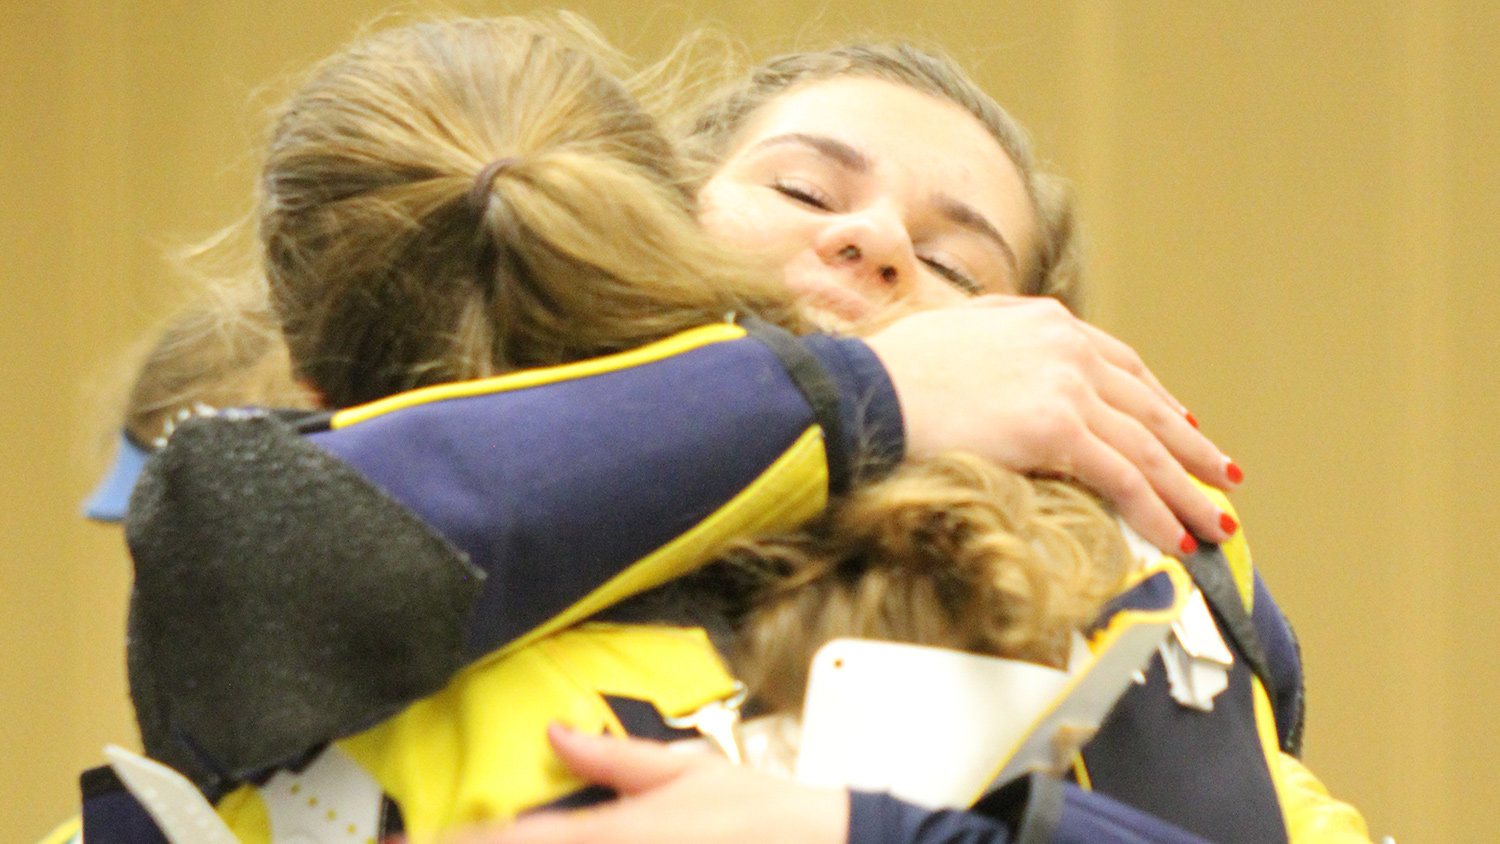 Elizabeth Marsh and Morgan Phillips embrace after the match